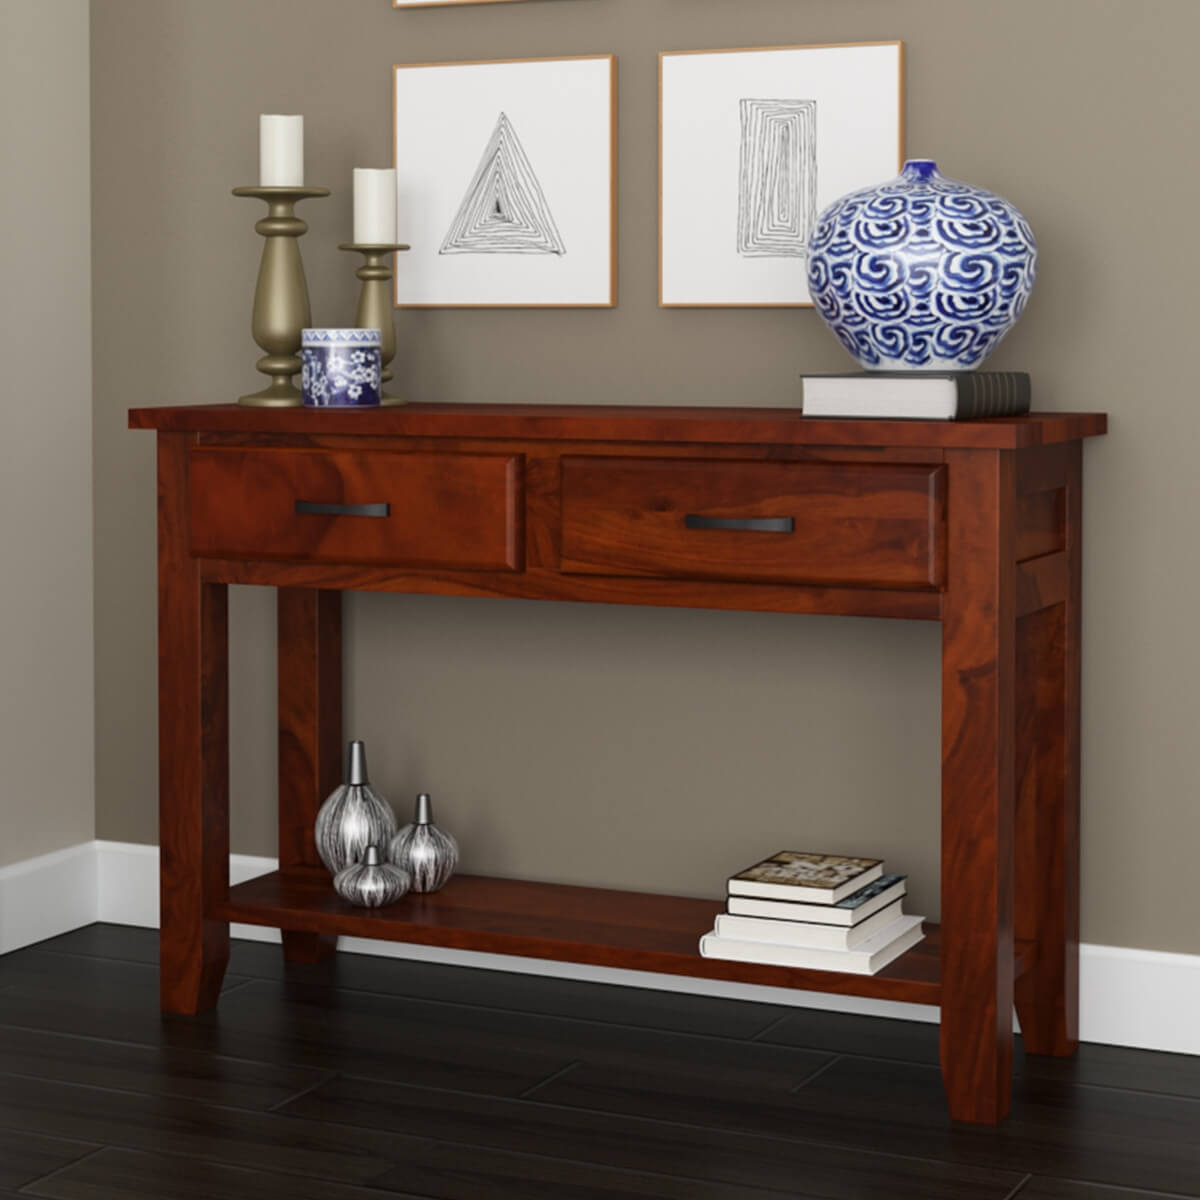 Wooden Console Table With Storage For